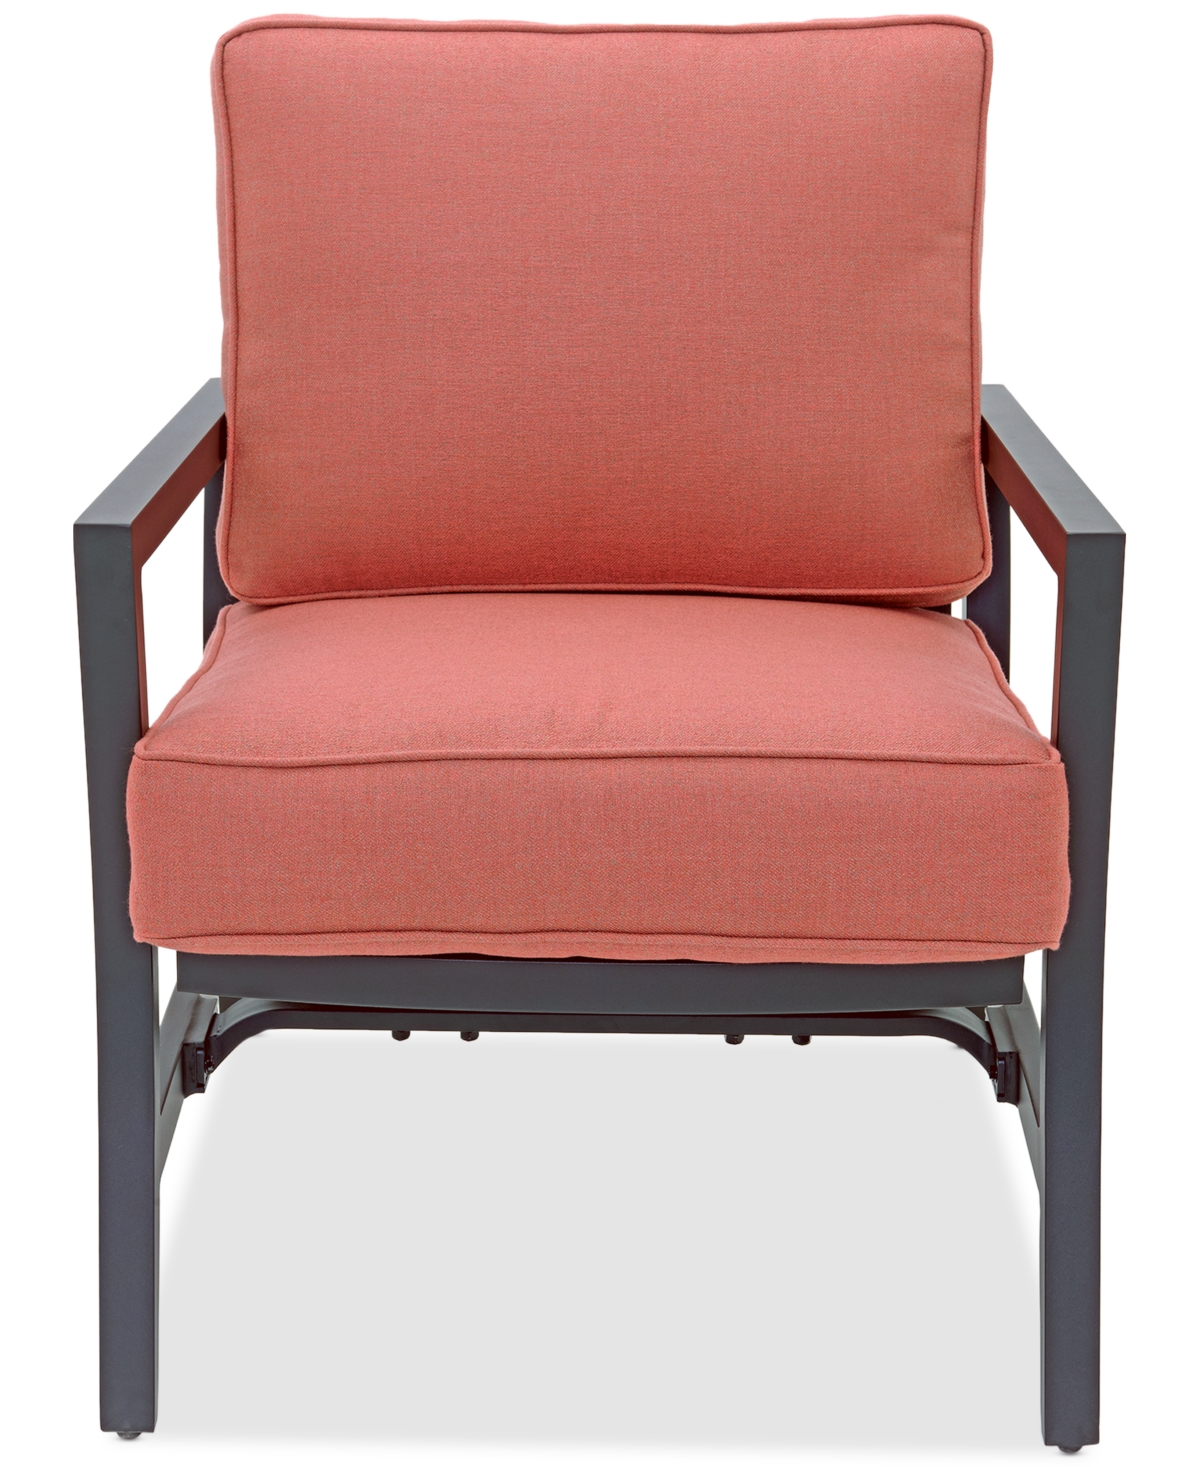 Shop Agio Astaire Outdoor 3-pc Rocker Chair Set (2 Rocker Chairs + 1 End Table) In Peony Brick Red